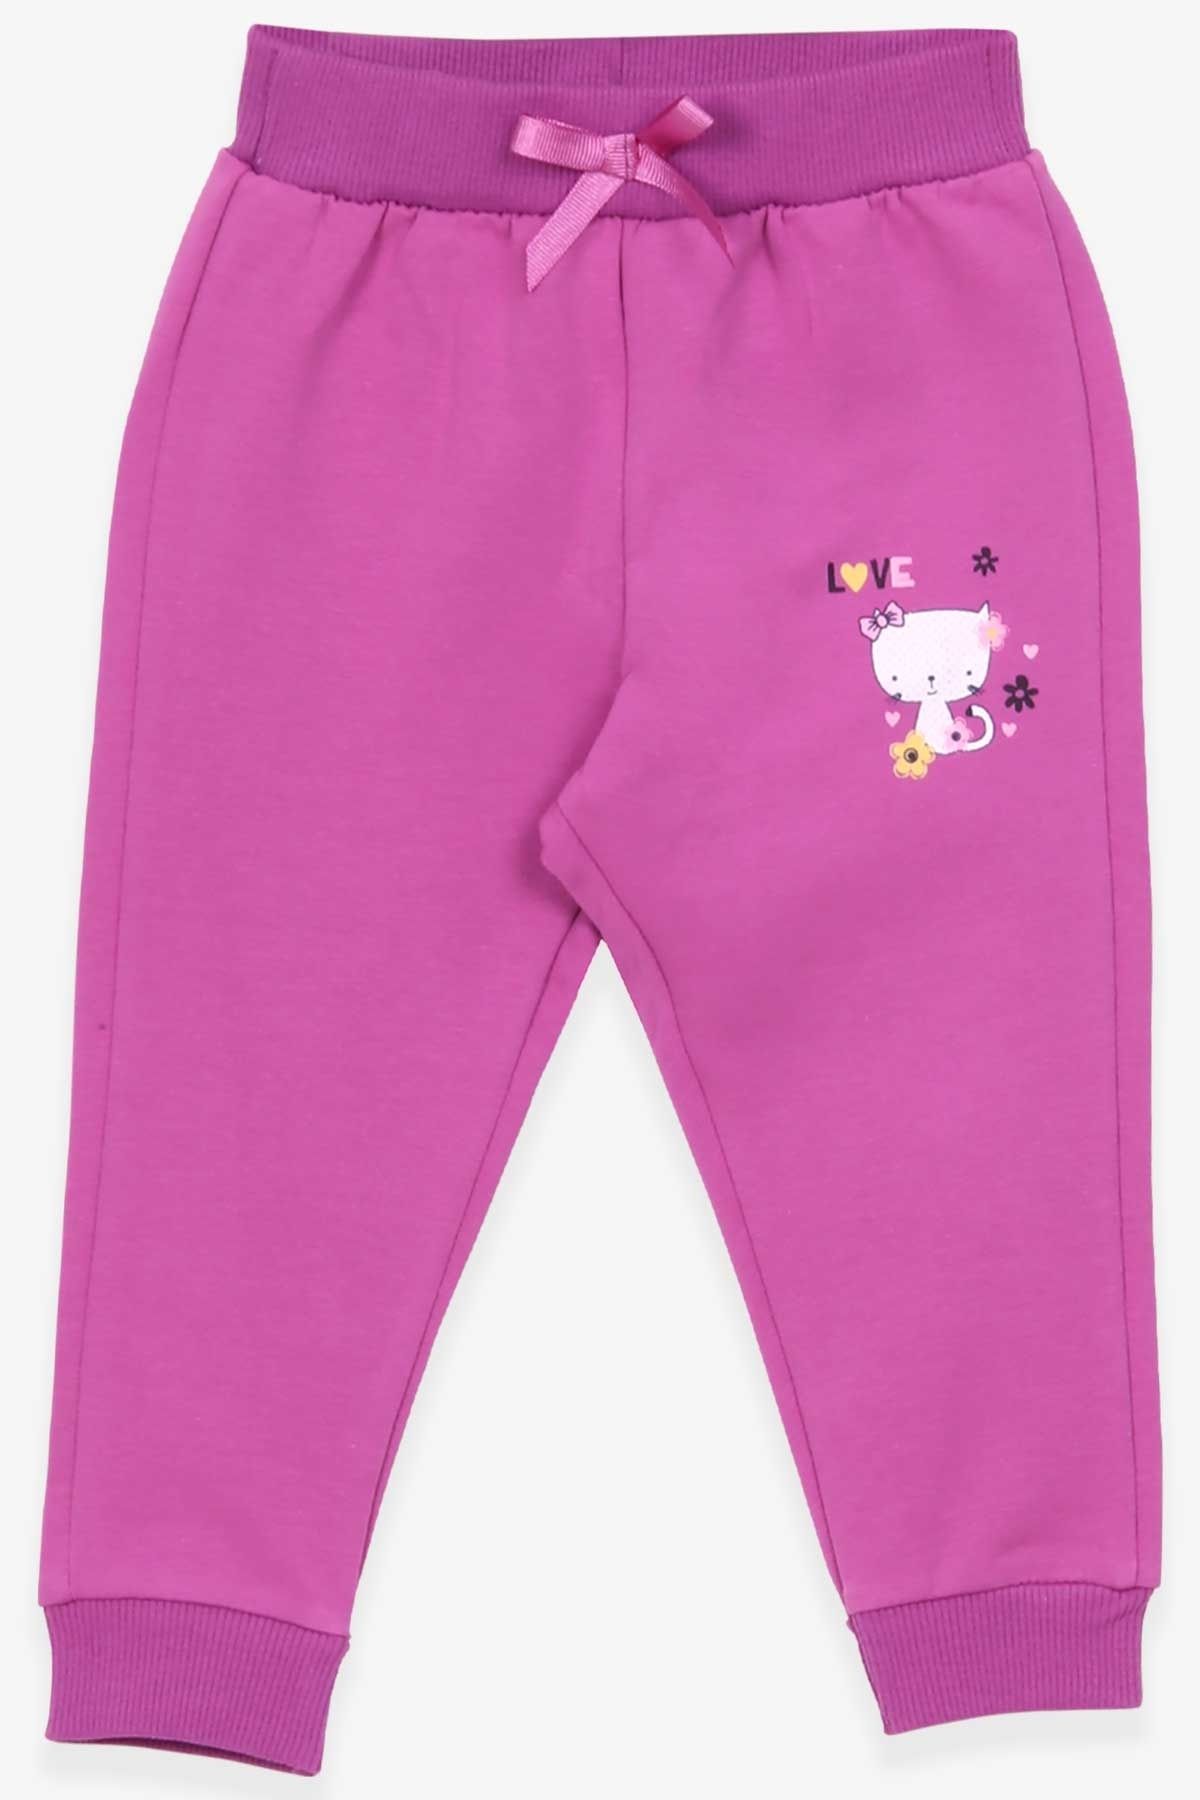 Breeze Baby Girl Sweatpants Cat Printed 6 Months-2 Years, Lilac